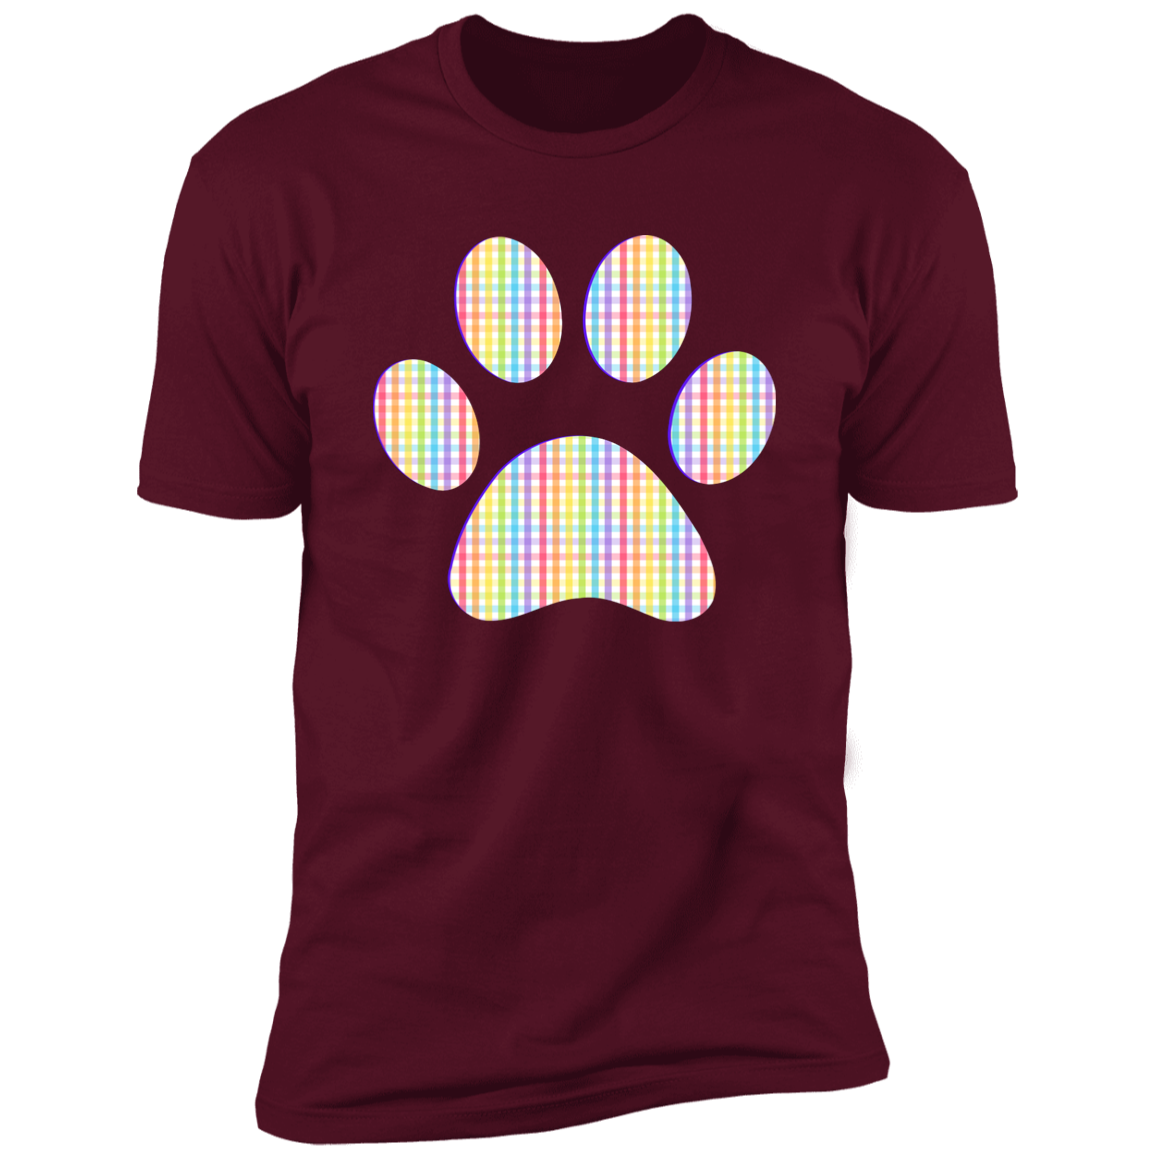 Pride Paw (Gingham) Pride T-shirt, Paw Pride Dog Shirt for humans, in maroon